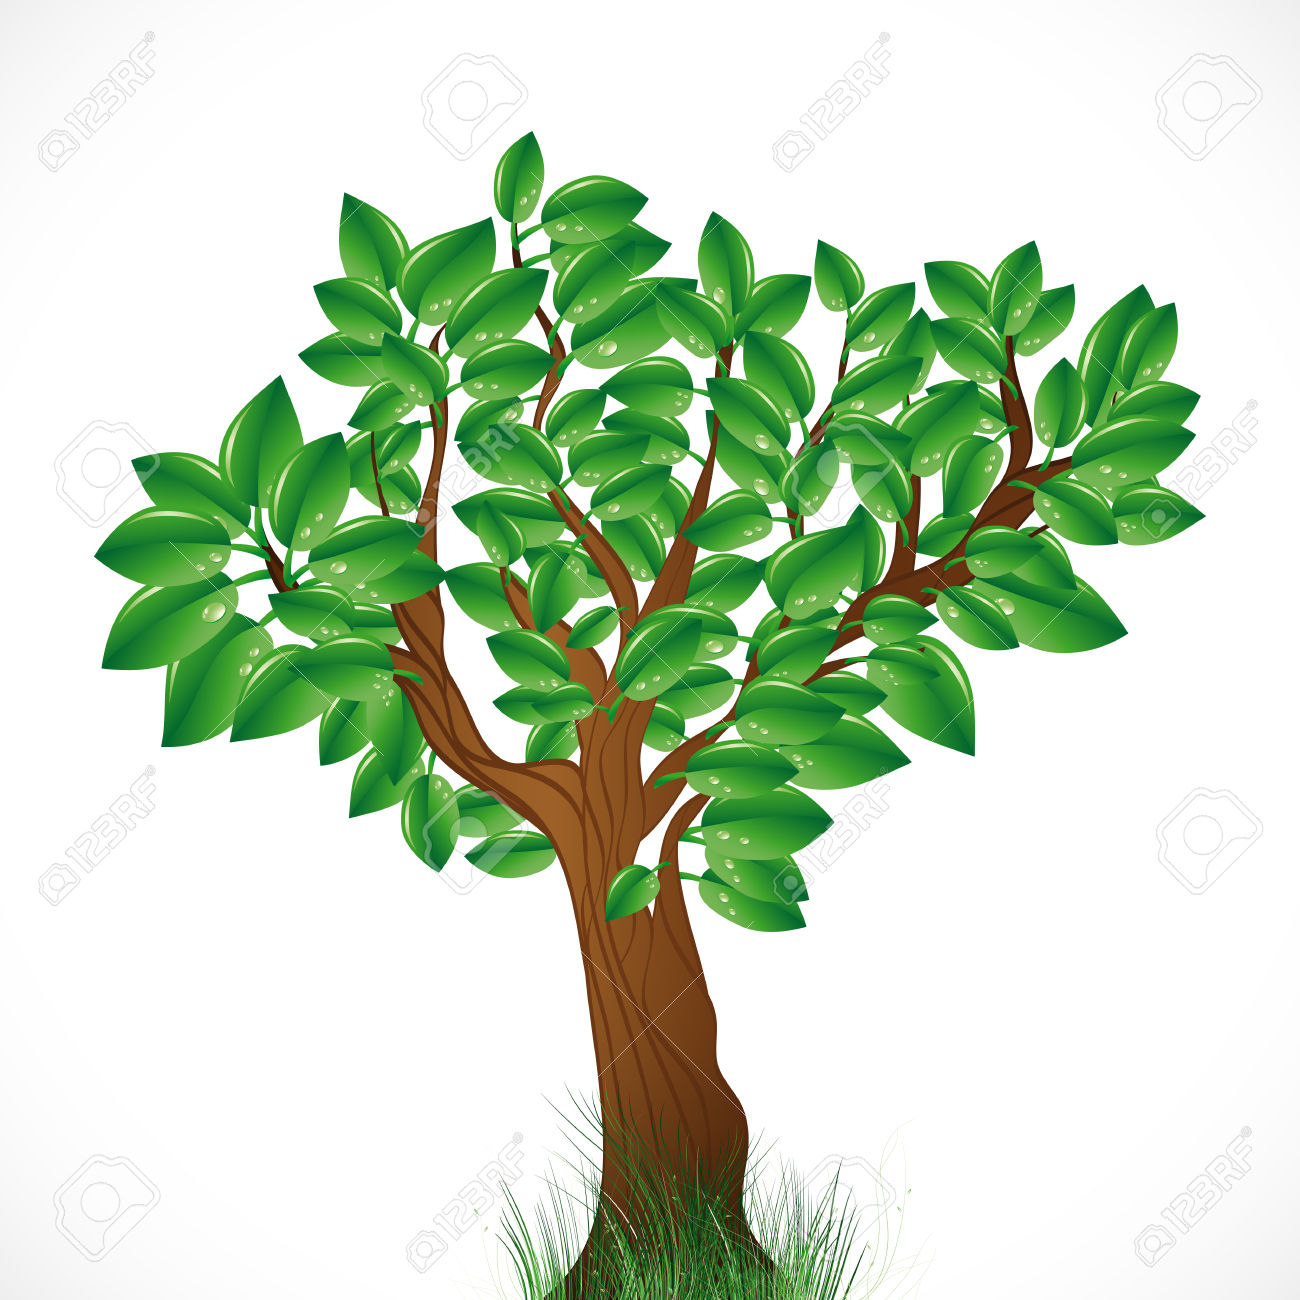 Natural background with green tree and grass royalty free